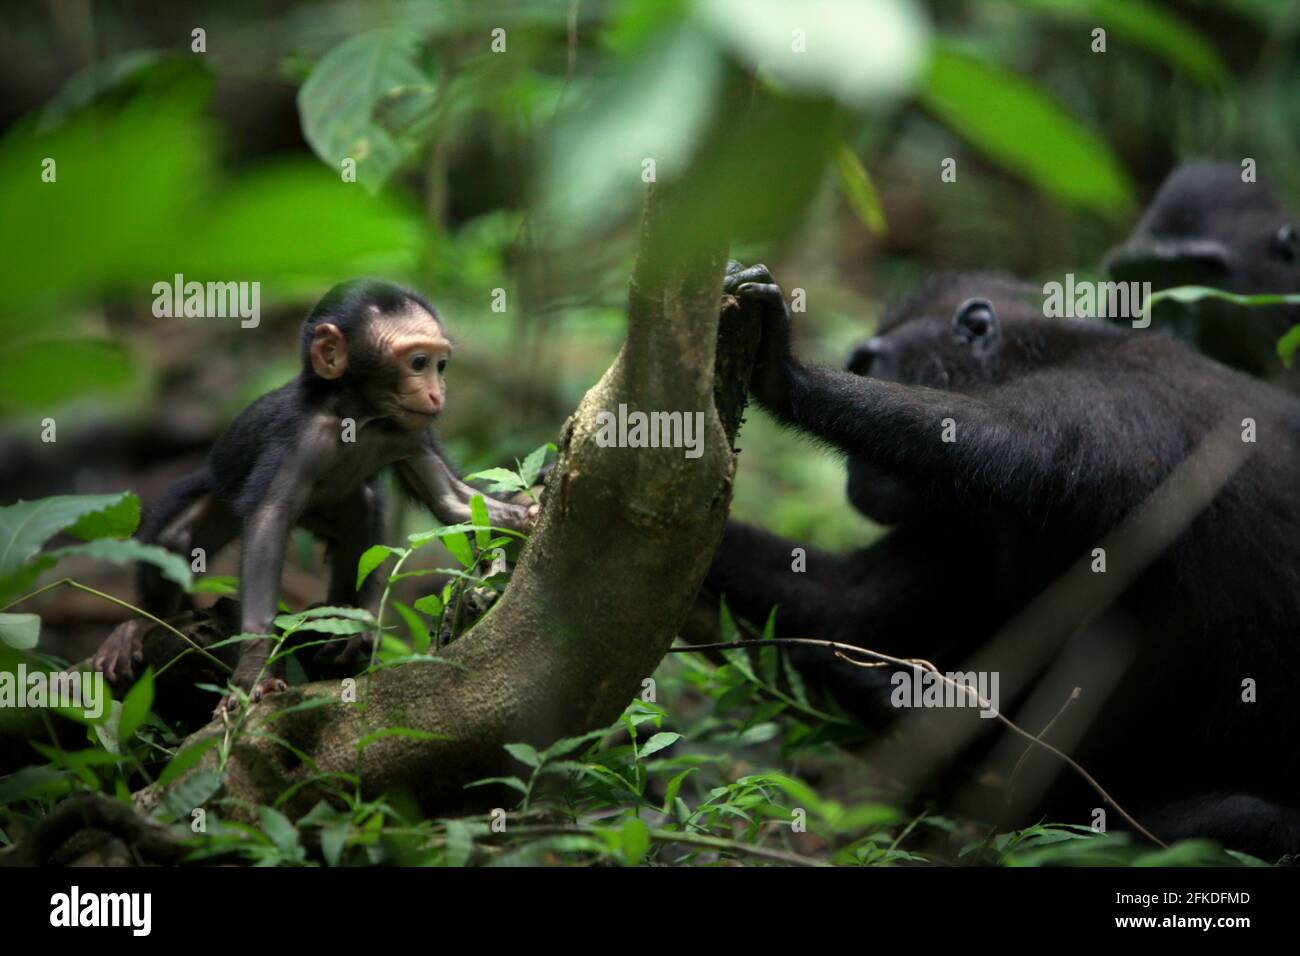 A baby of Sulawesi crested black macaque (Macaca nigra) is playing with adult female individuals during weaning period in Tangkoko, Indonesia. Stock Photo